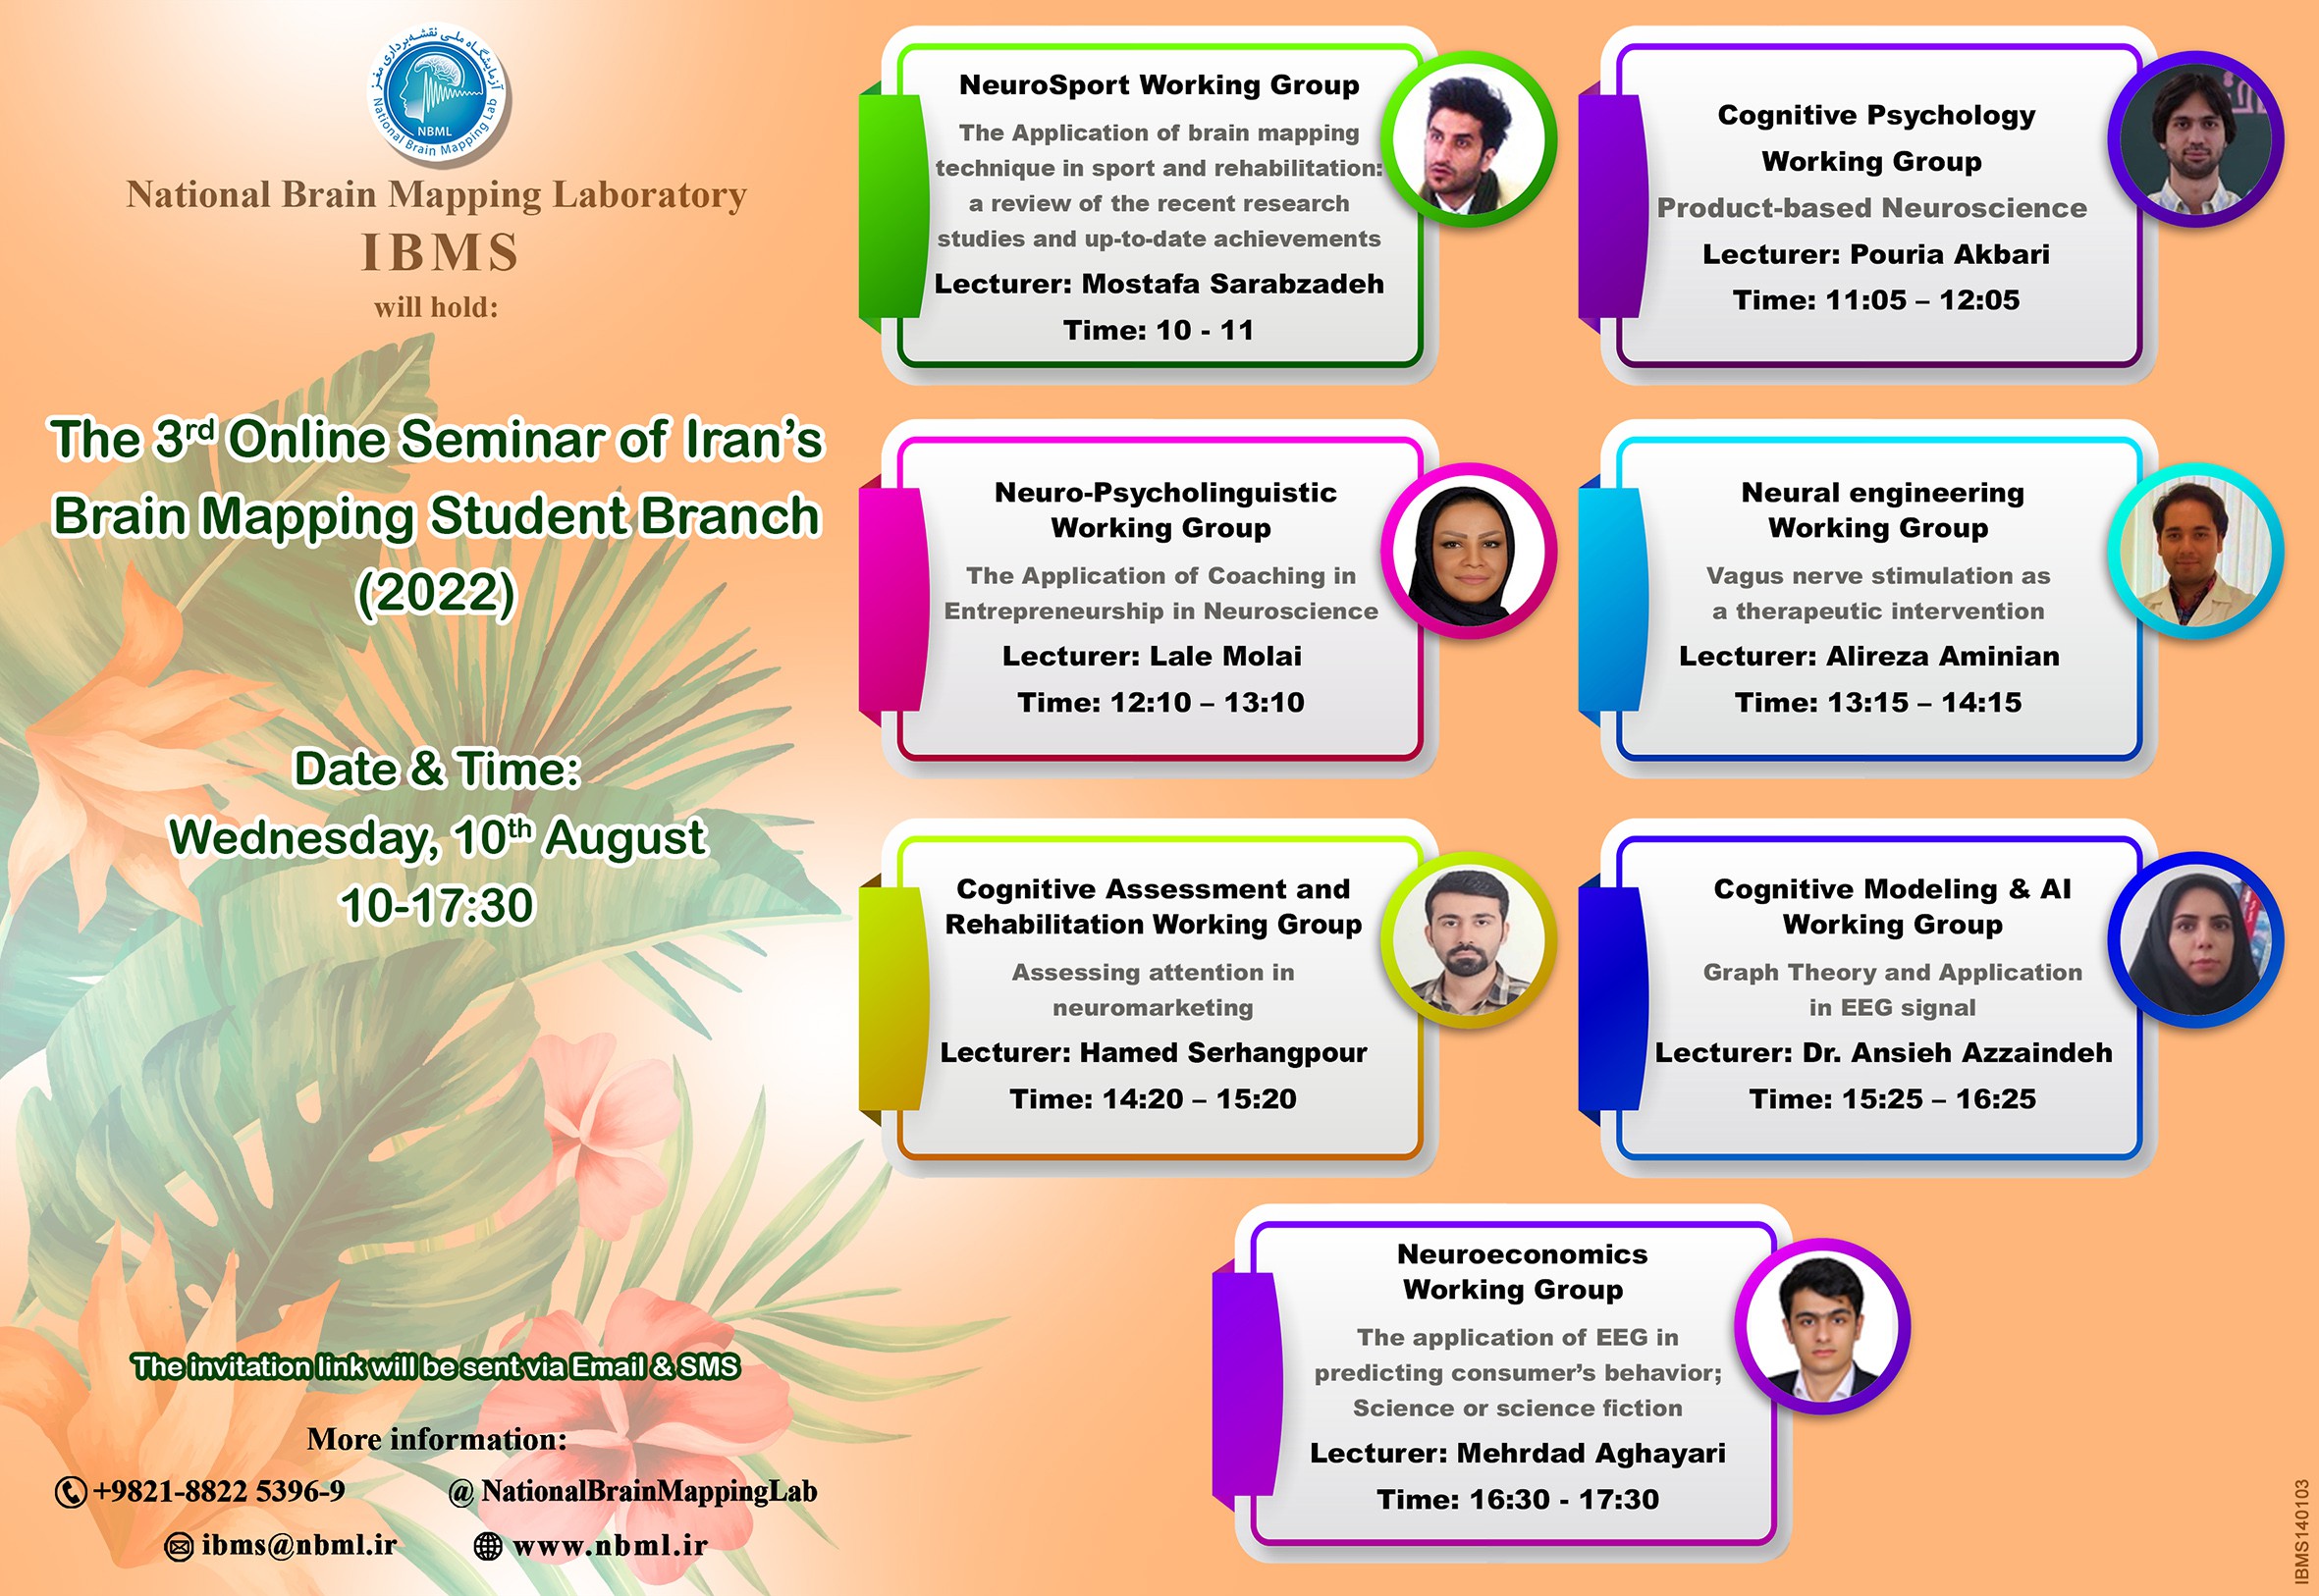 The 3rd Online Seminar of Iran’s Brain Mapping Student Branch (2022)